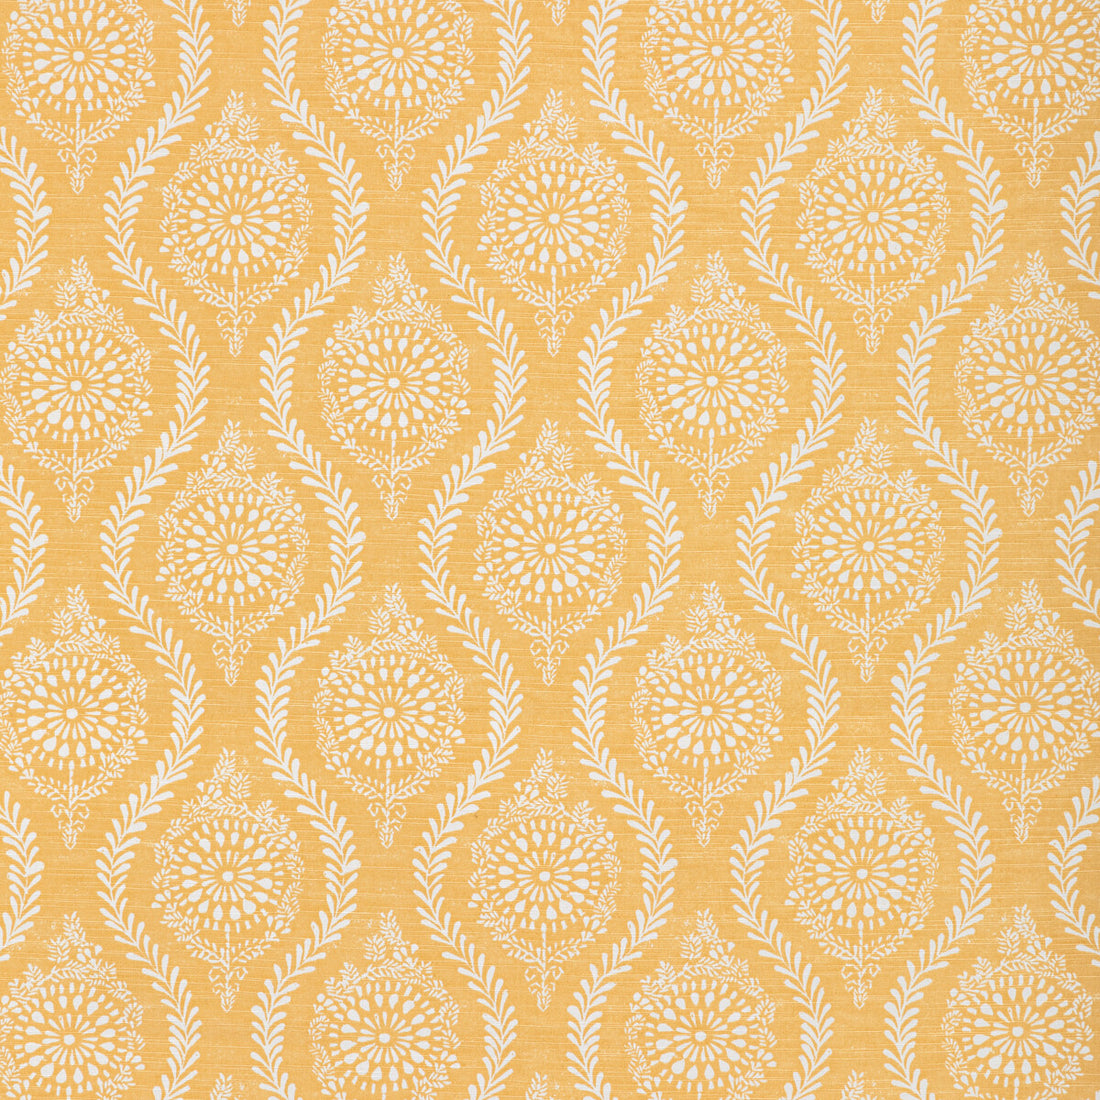 Marindol Print fabric in canary color - pattern 8022105.40.0 - by Brunschwig &amp; Fils in the Manoir collection